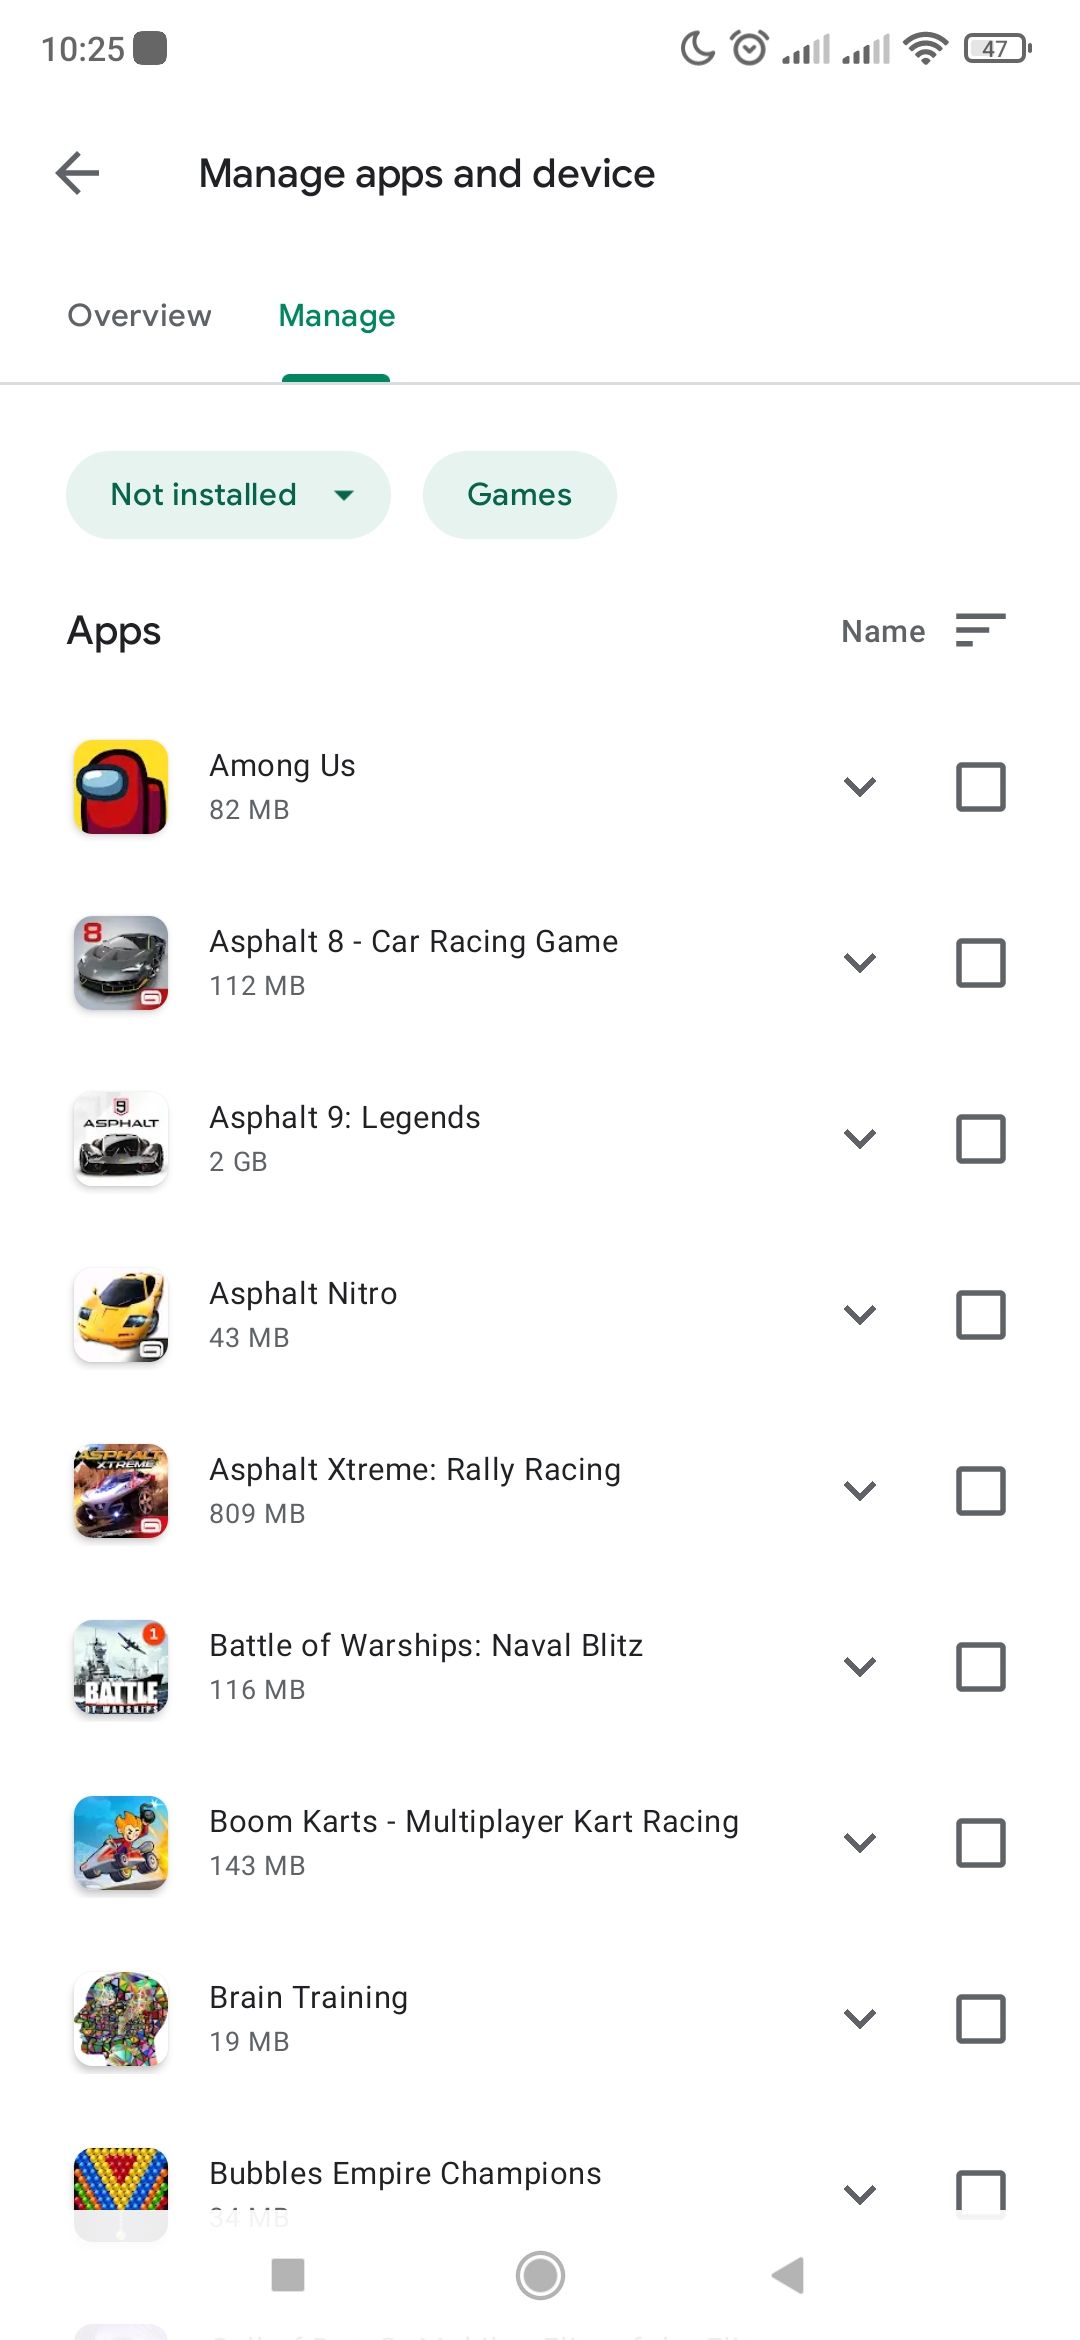 Google Play Store manage apps and device section